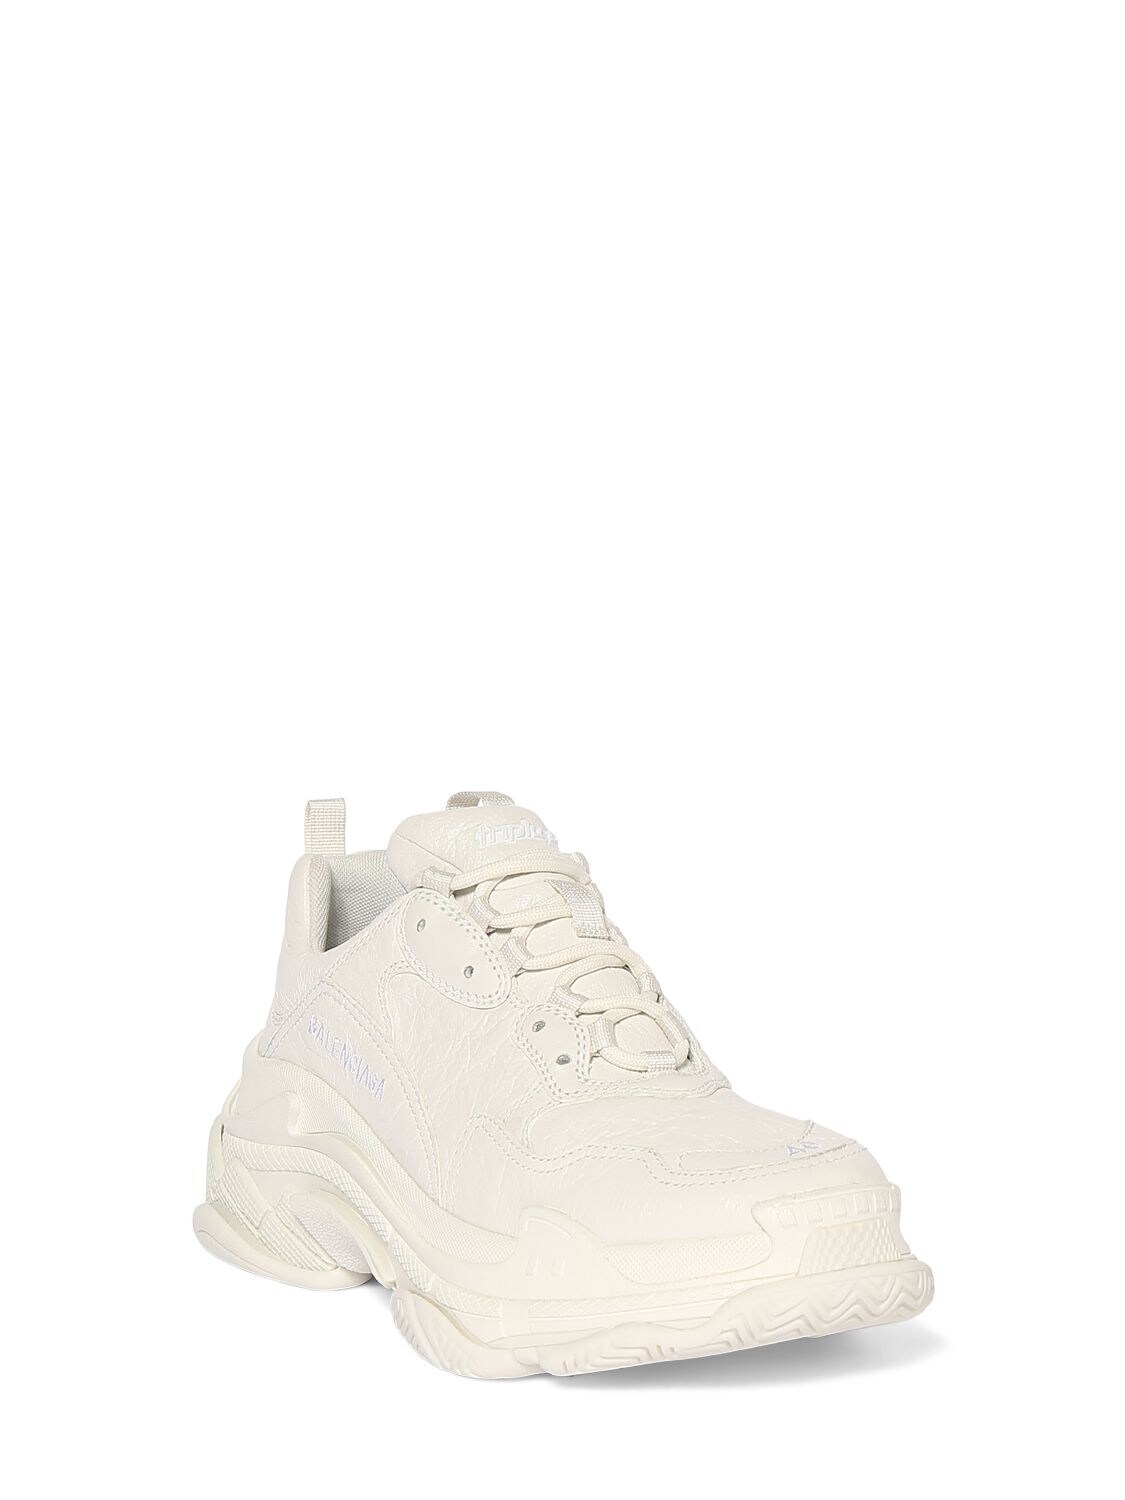 Shop Balenciaga 60mm Triple S Leather Sneakers In Optic White